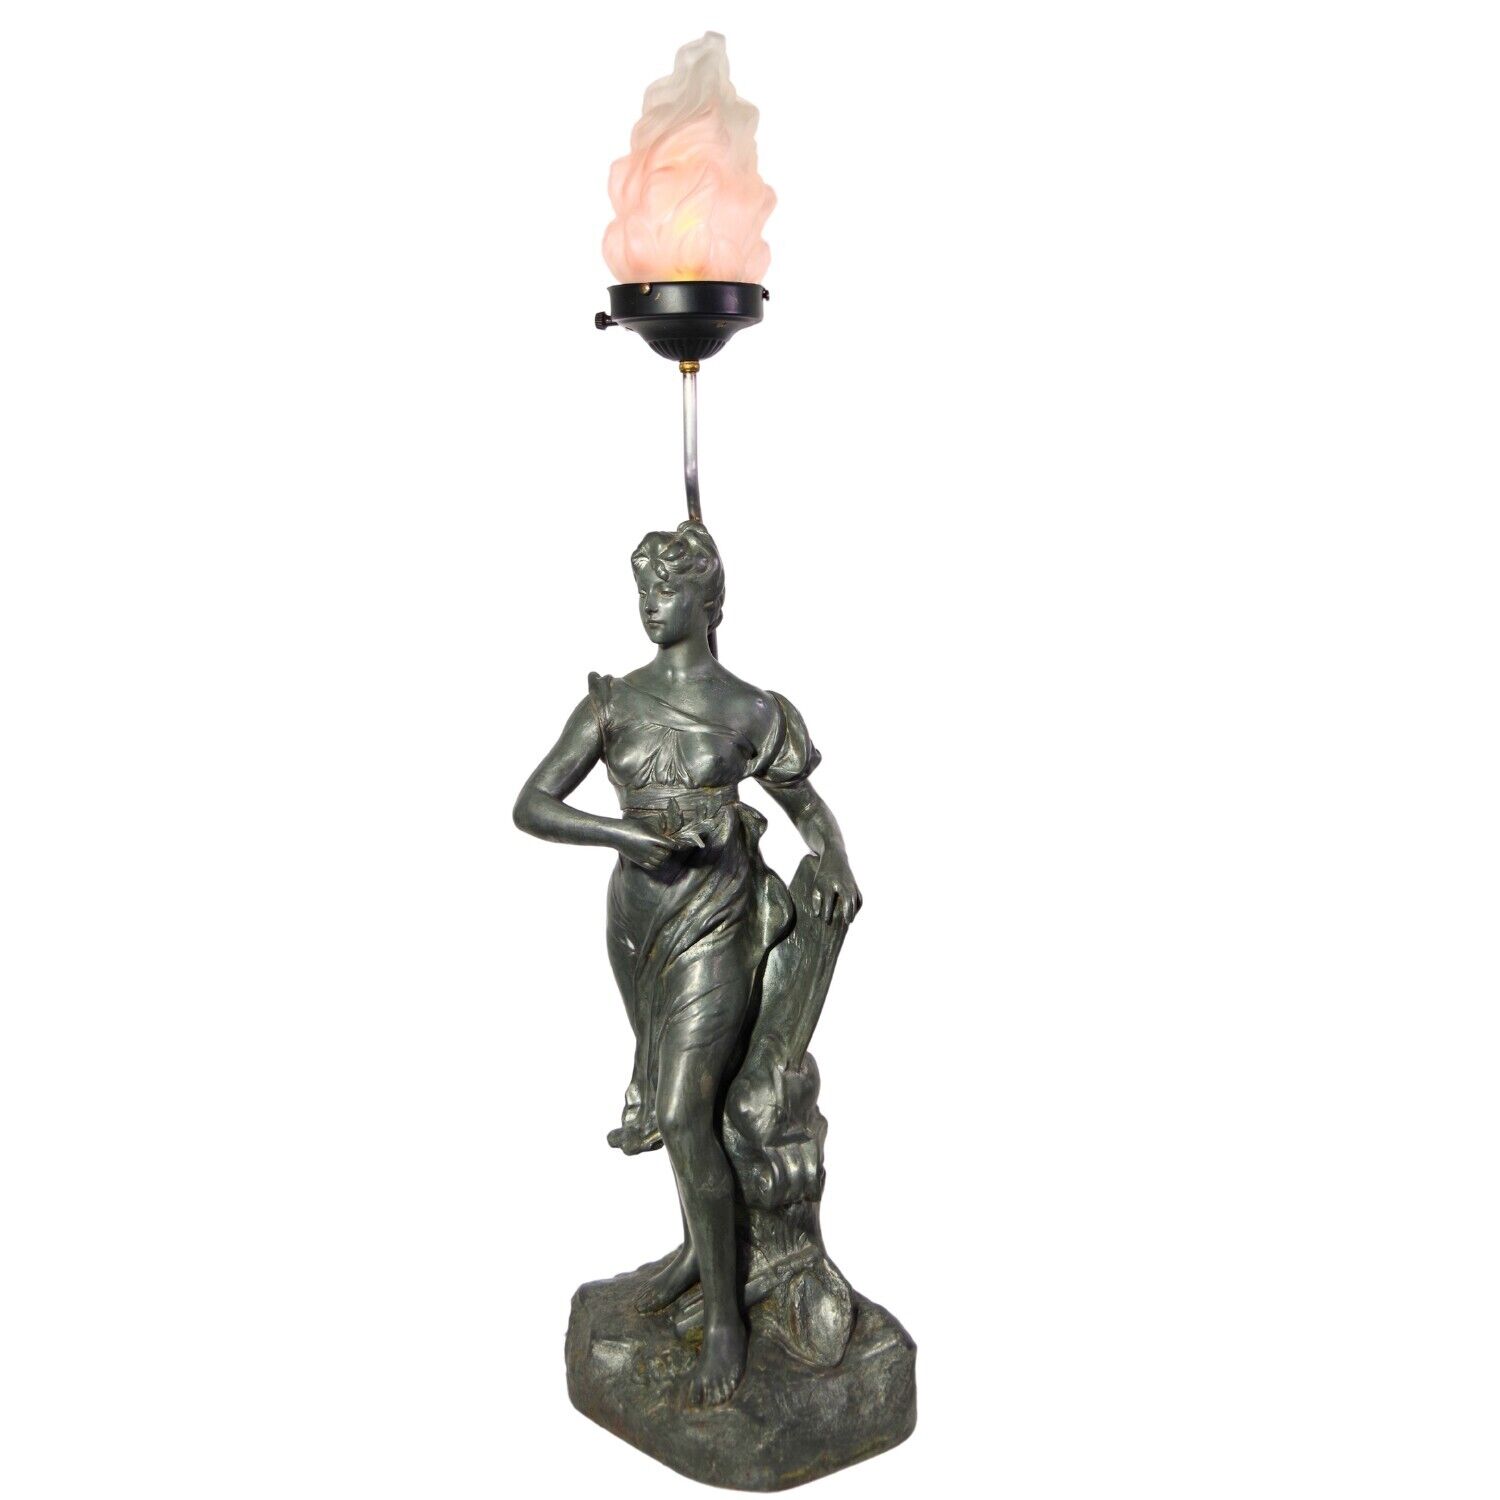 Exquisite French Table Lamp: Stamped and Signed H. Levasseur Early 19th Century